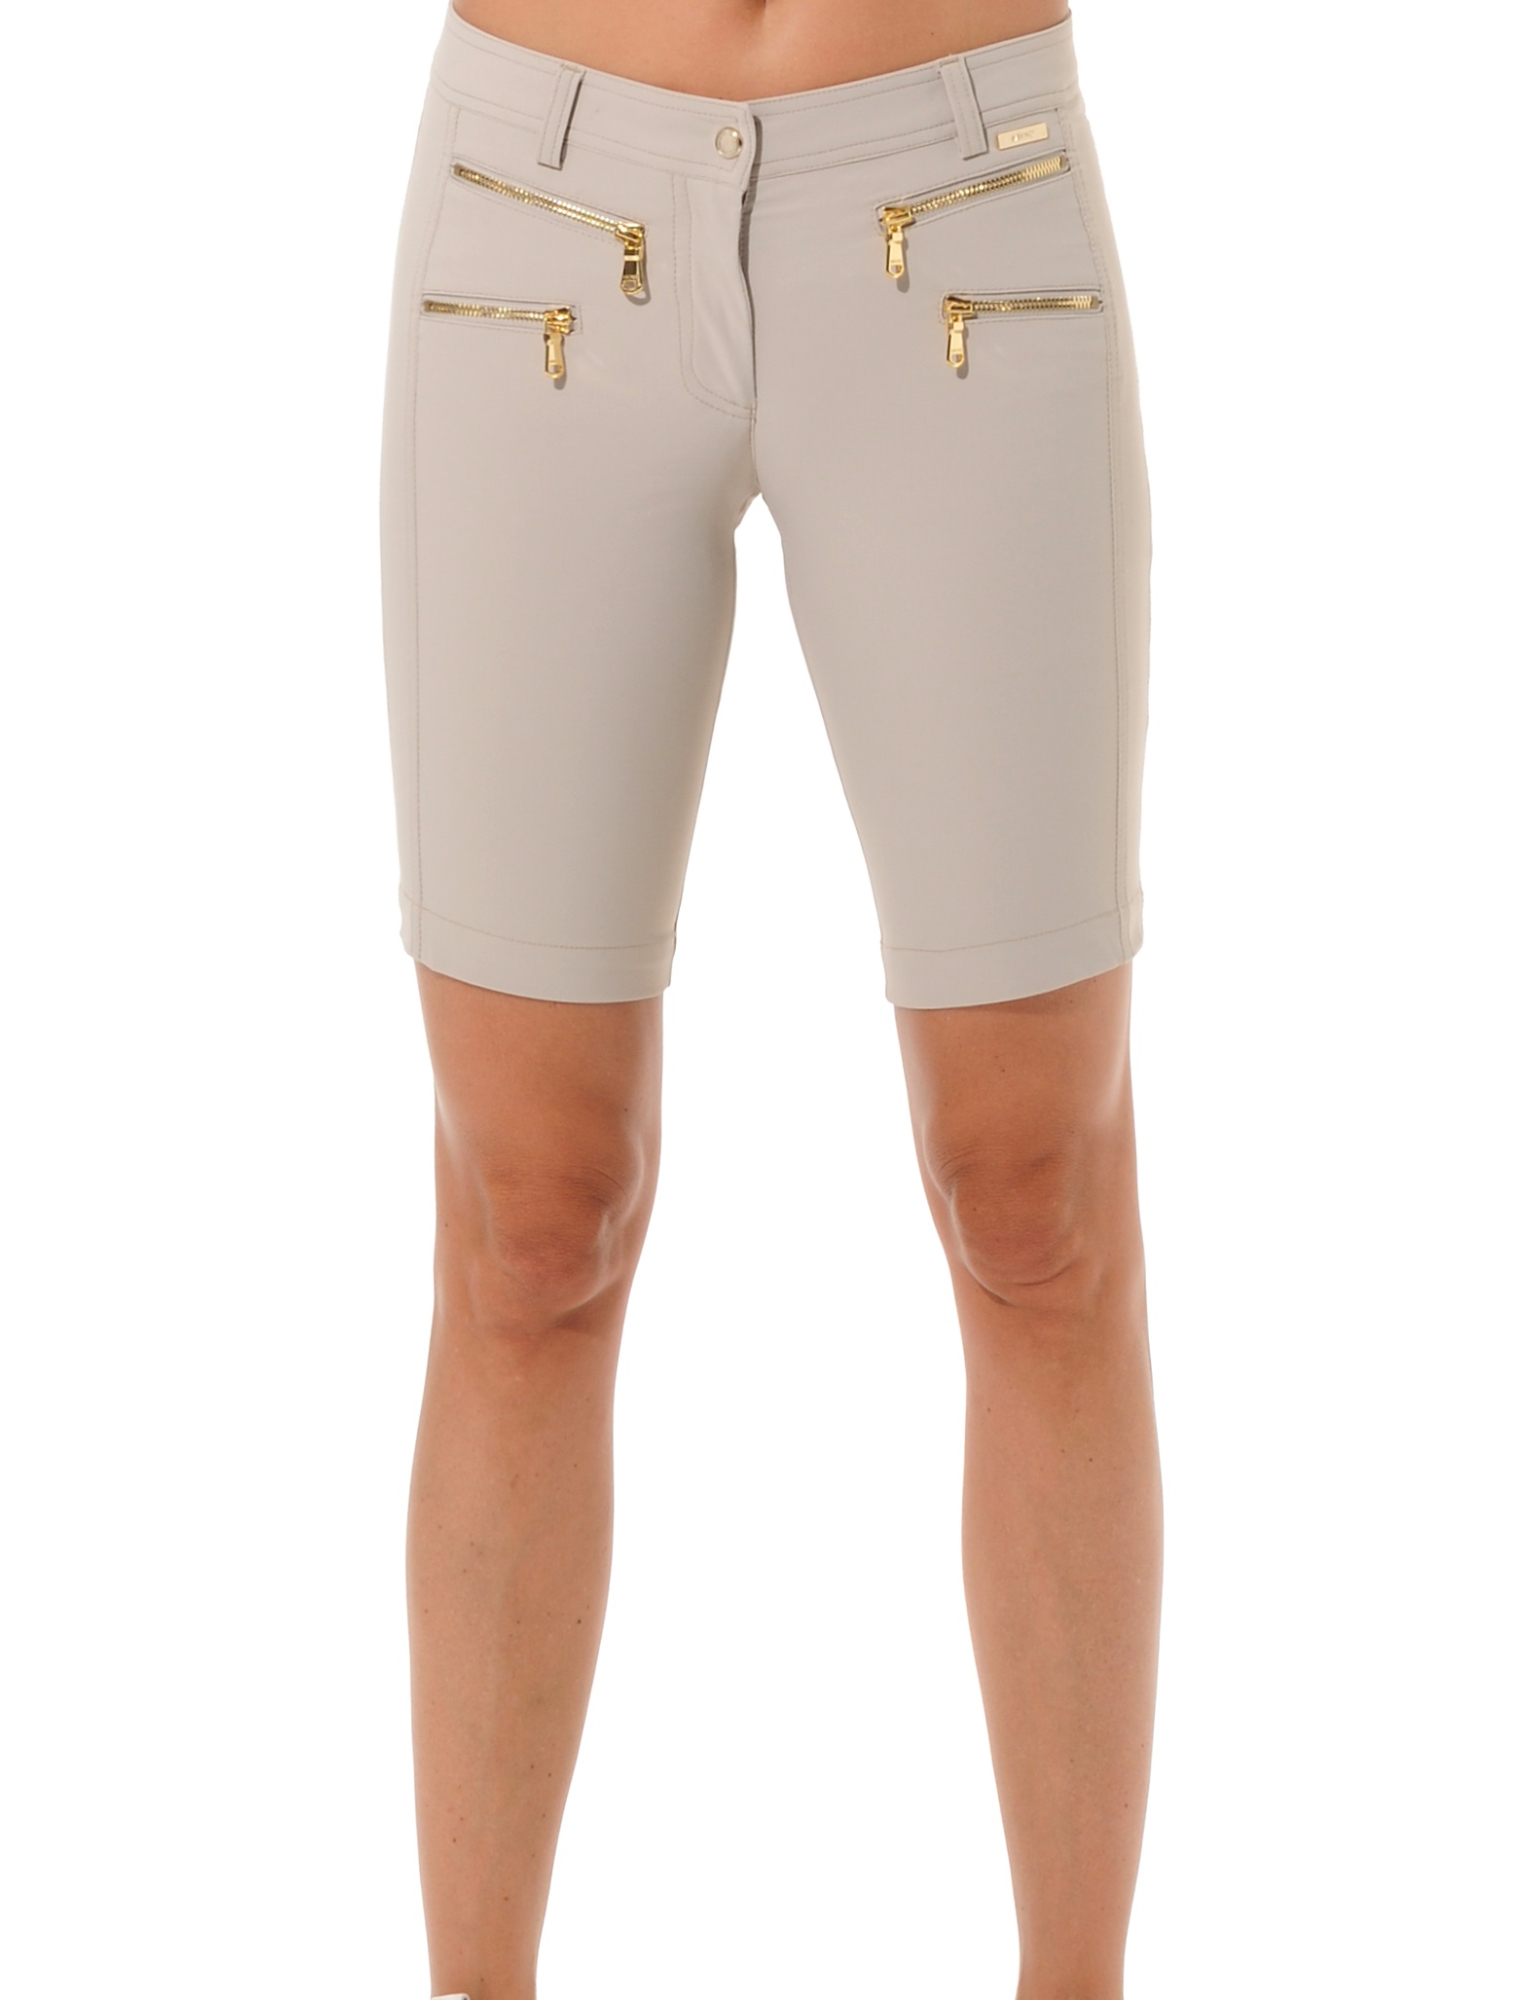 4way stretch shiny gold double zip shorts light taupe 